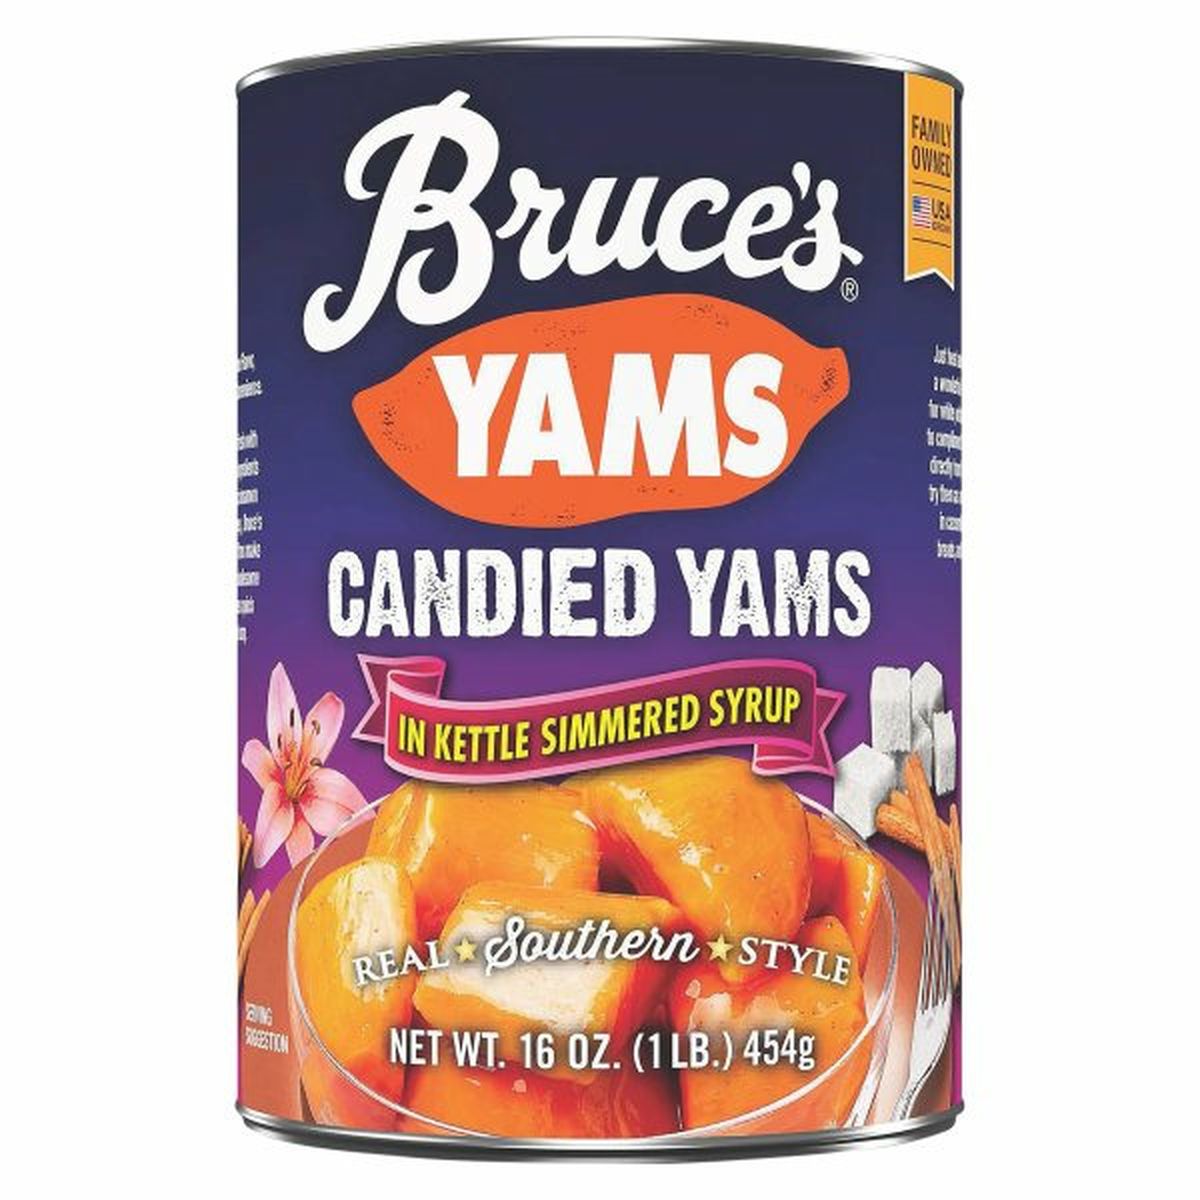 Calories in Bruce's Yams Candied Yams